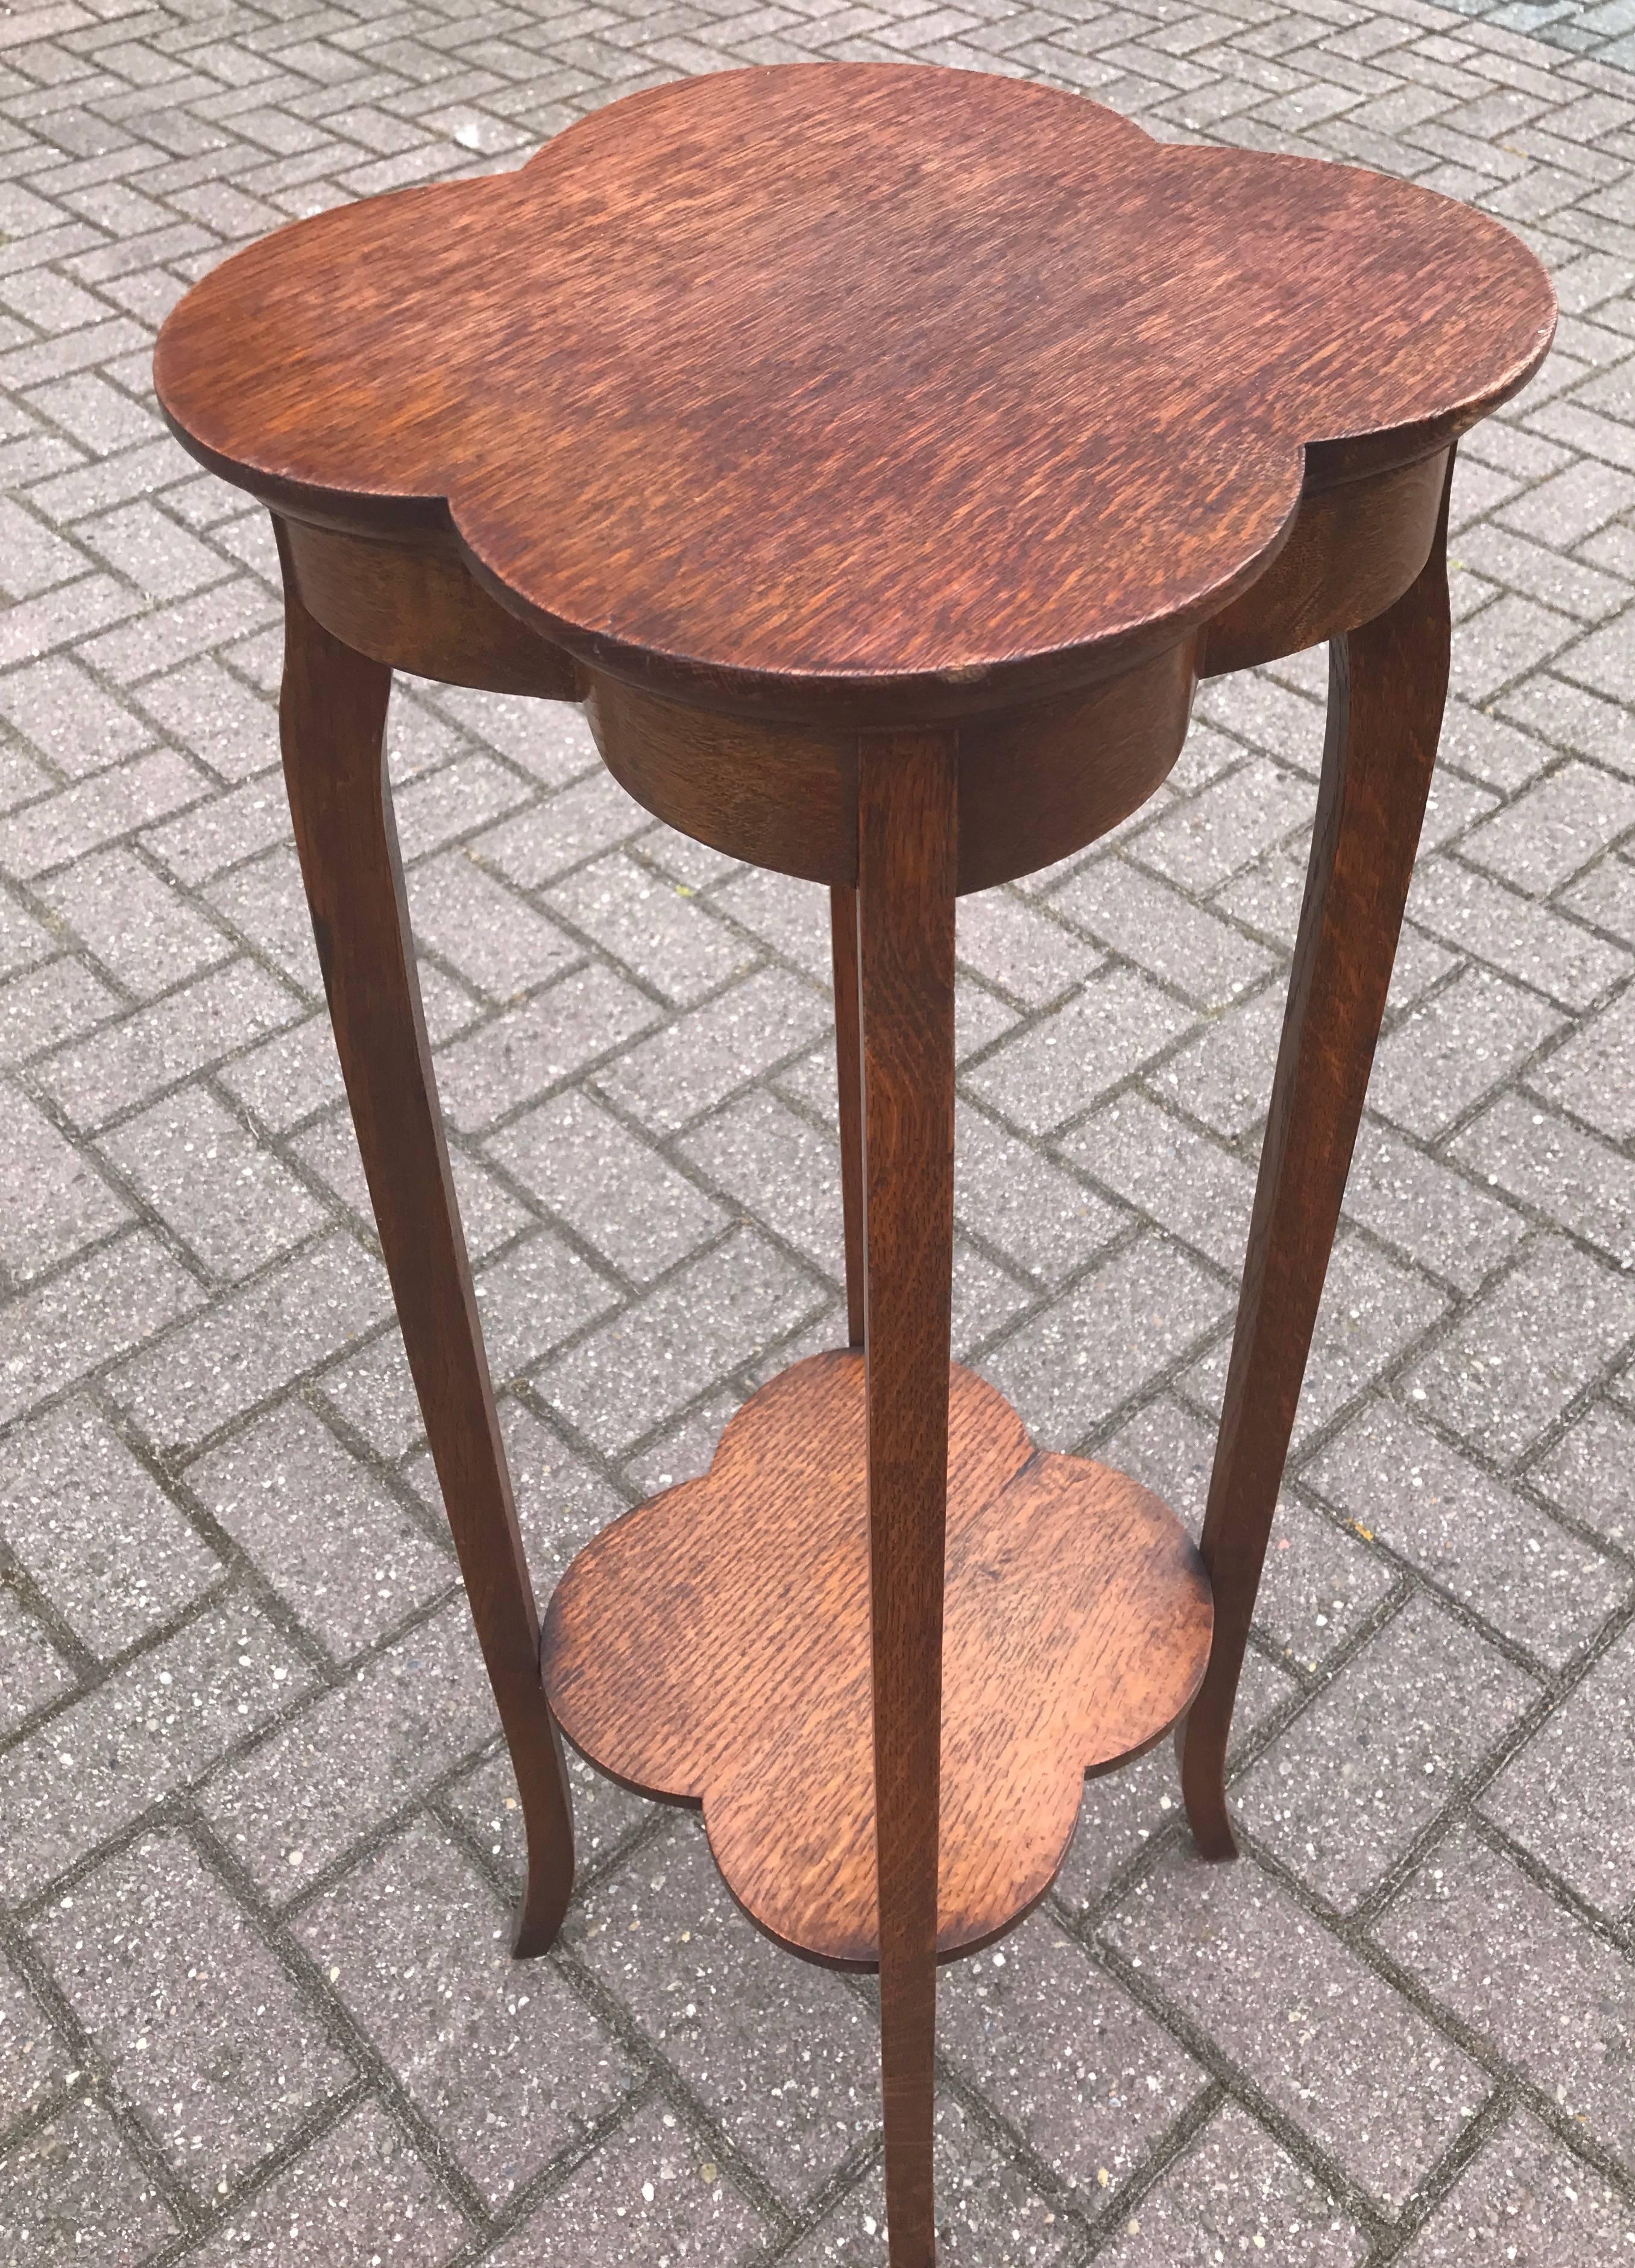 flower shaped table